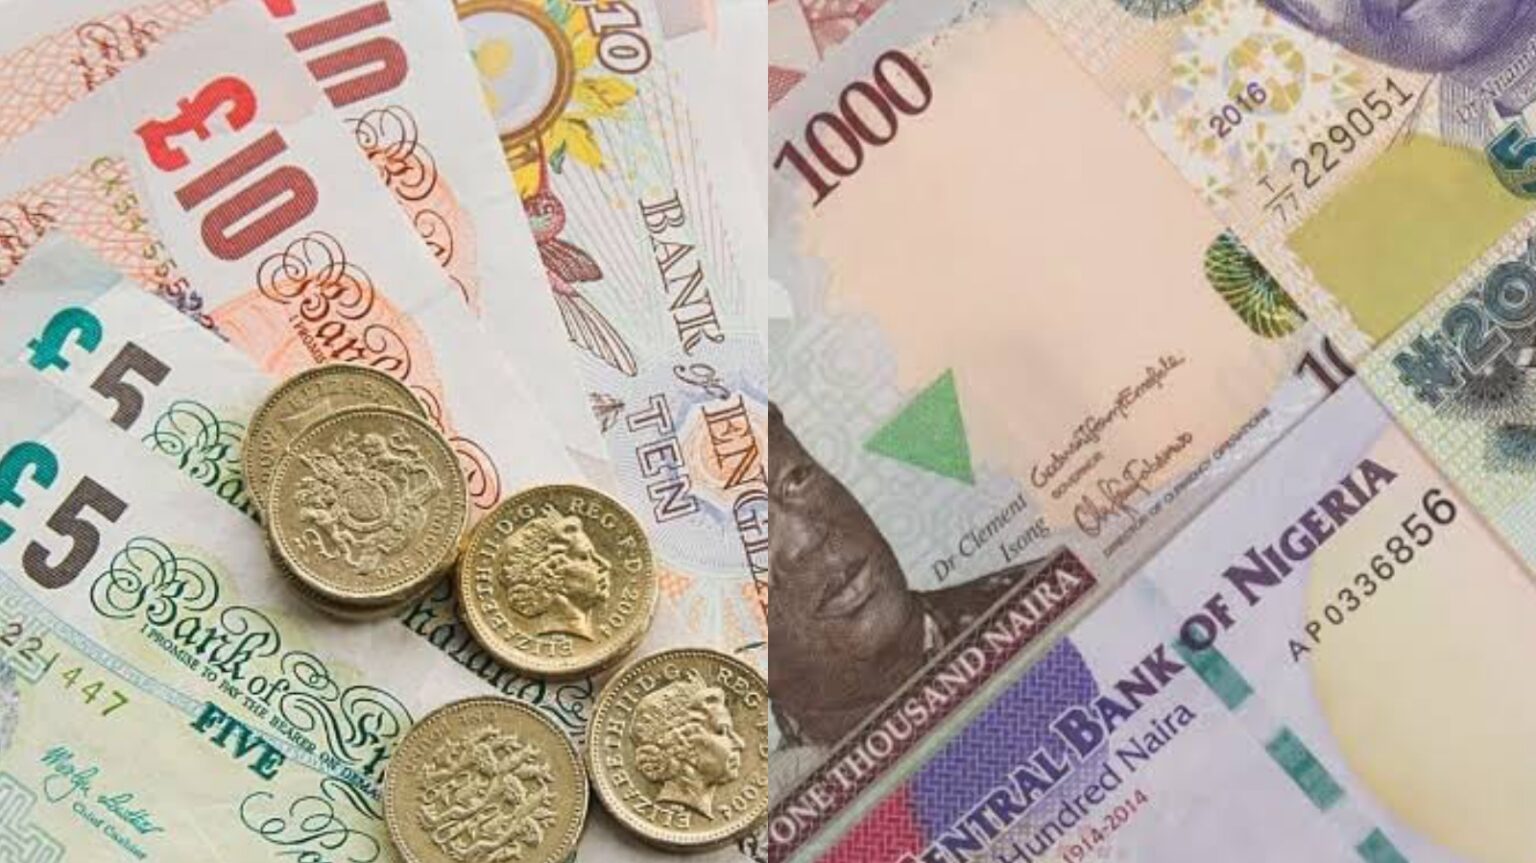 Black market pounds to naira exchange rate today, April 26, 2022